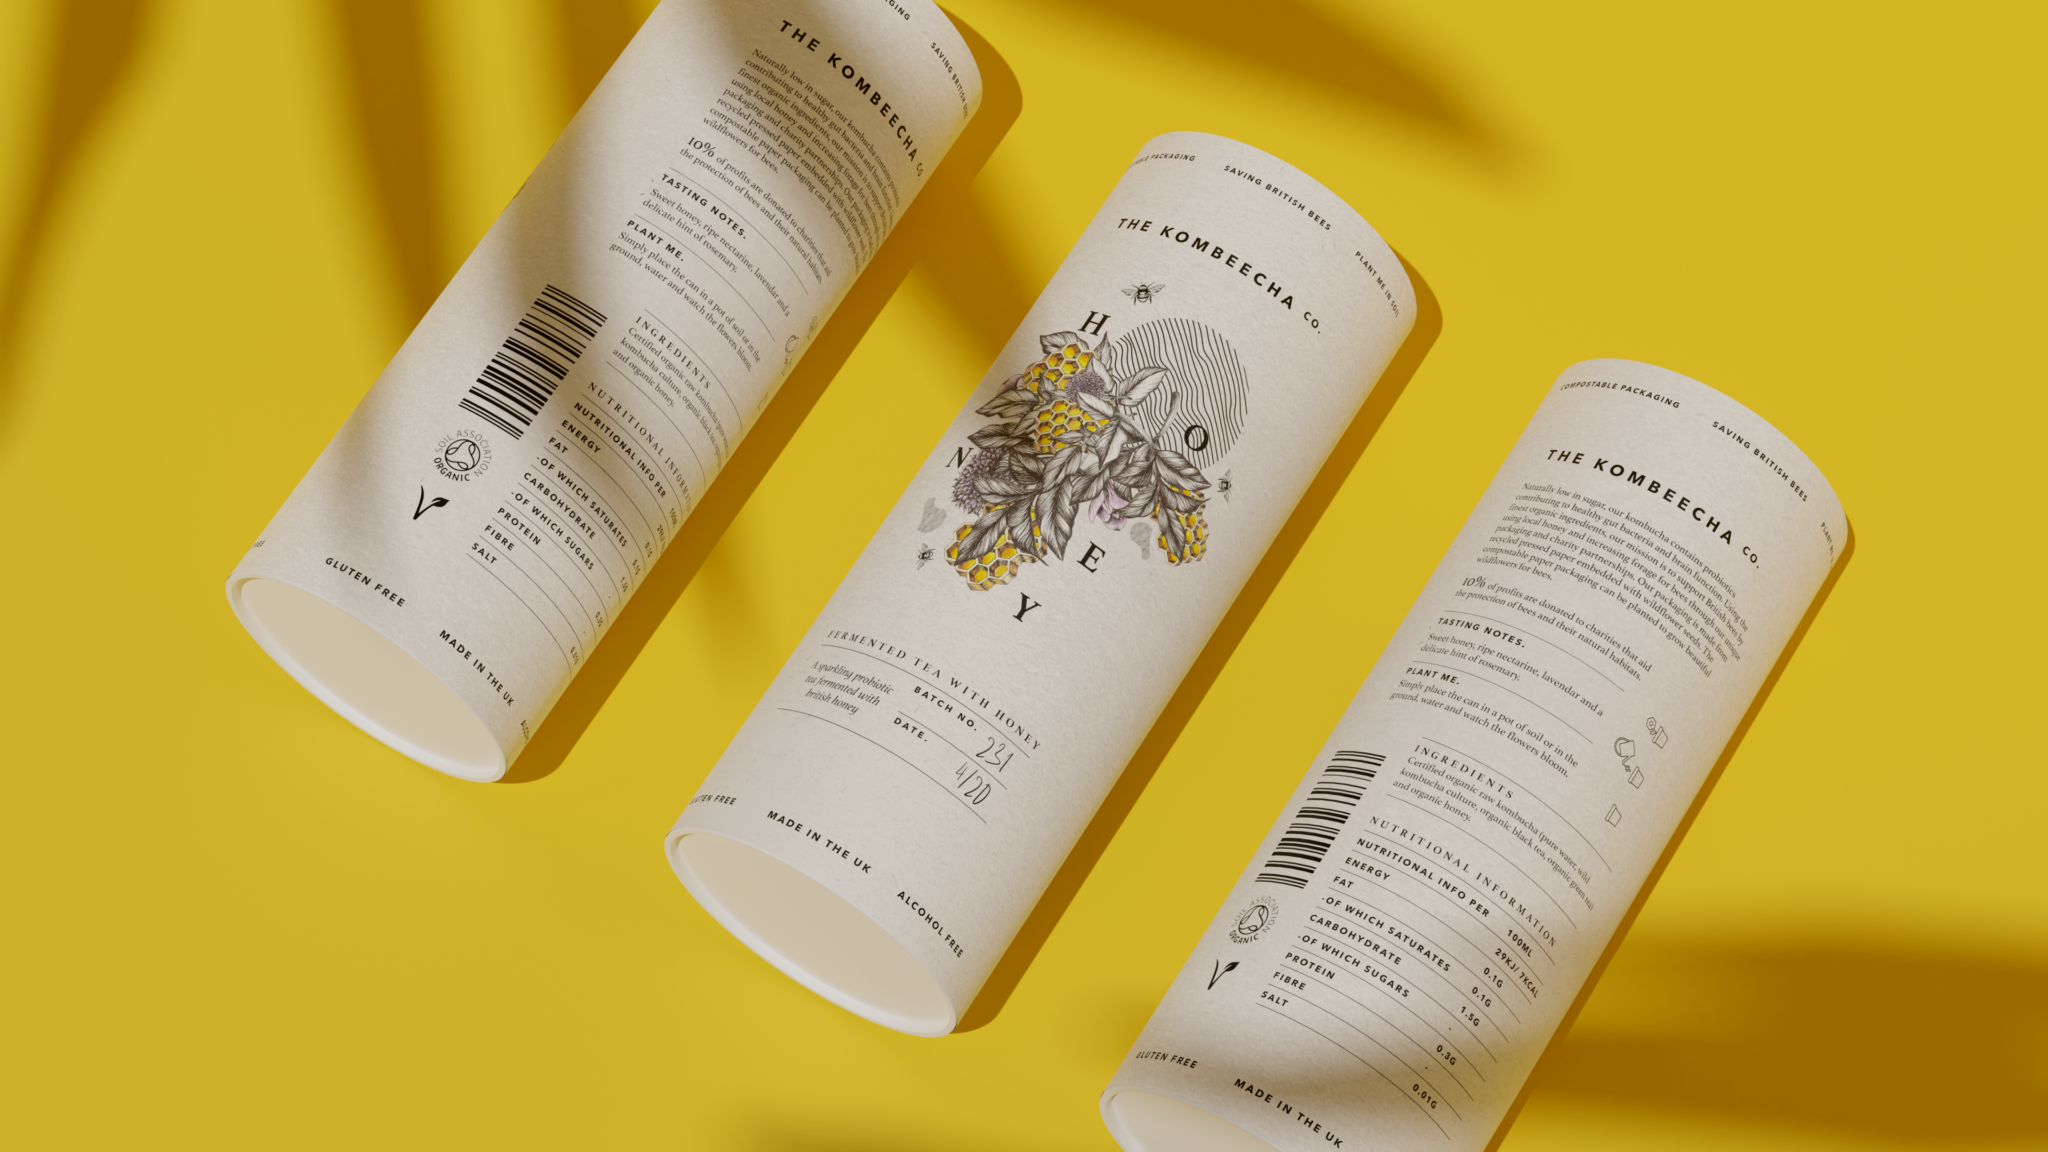 Image shows an overhead shot of the kombucha drinks with illustrative bee branding against a mustard yellow background